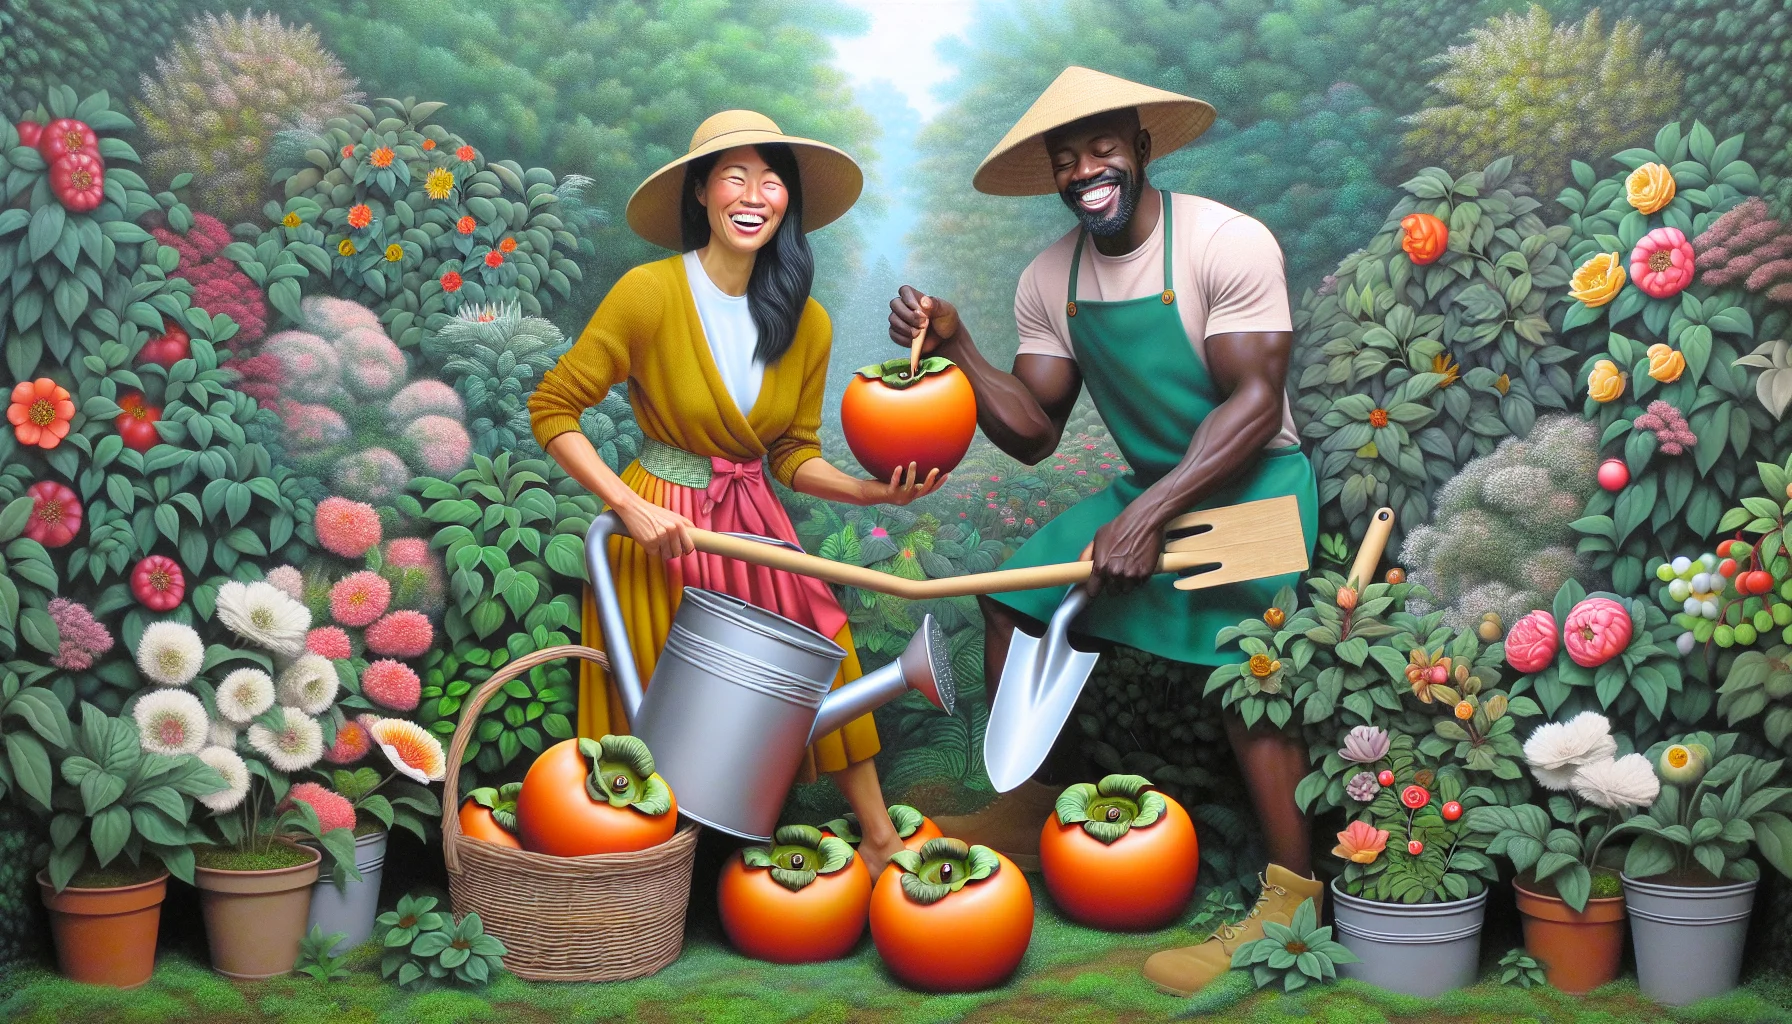 Create an image centered on a whimsical garden scenario. Picture this: a Filipino woman and a Black man, both dressed in vibrant gardening attire, surrounded by verdant vegetation and blooming flowers. In their hands are ripe persimmons, which they are comically trying to eat with oversized gardening tools - the woman with a large watering can and the man with a big trowel. Their expressions are full of laughter and amusement, subtly encouraging everyone to cherish the joy and humor in simple gardening activities.